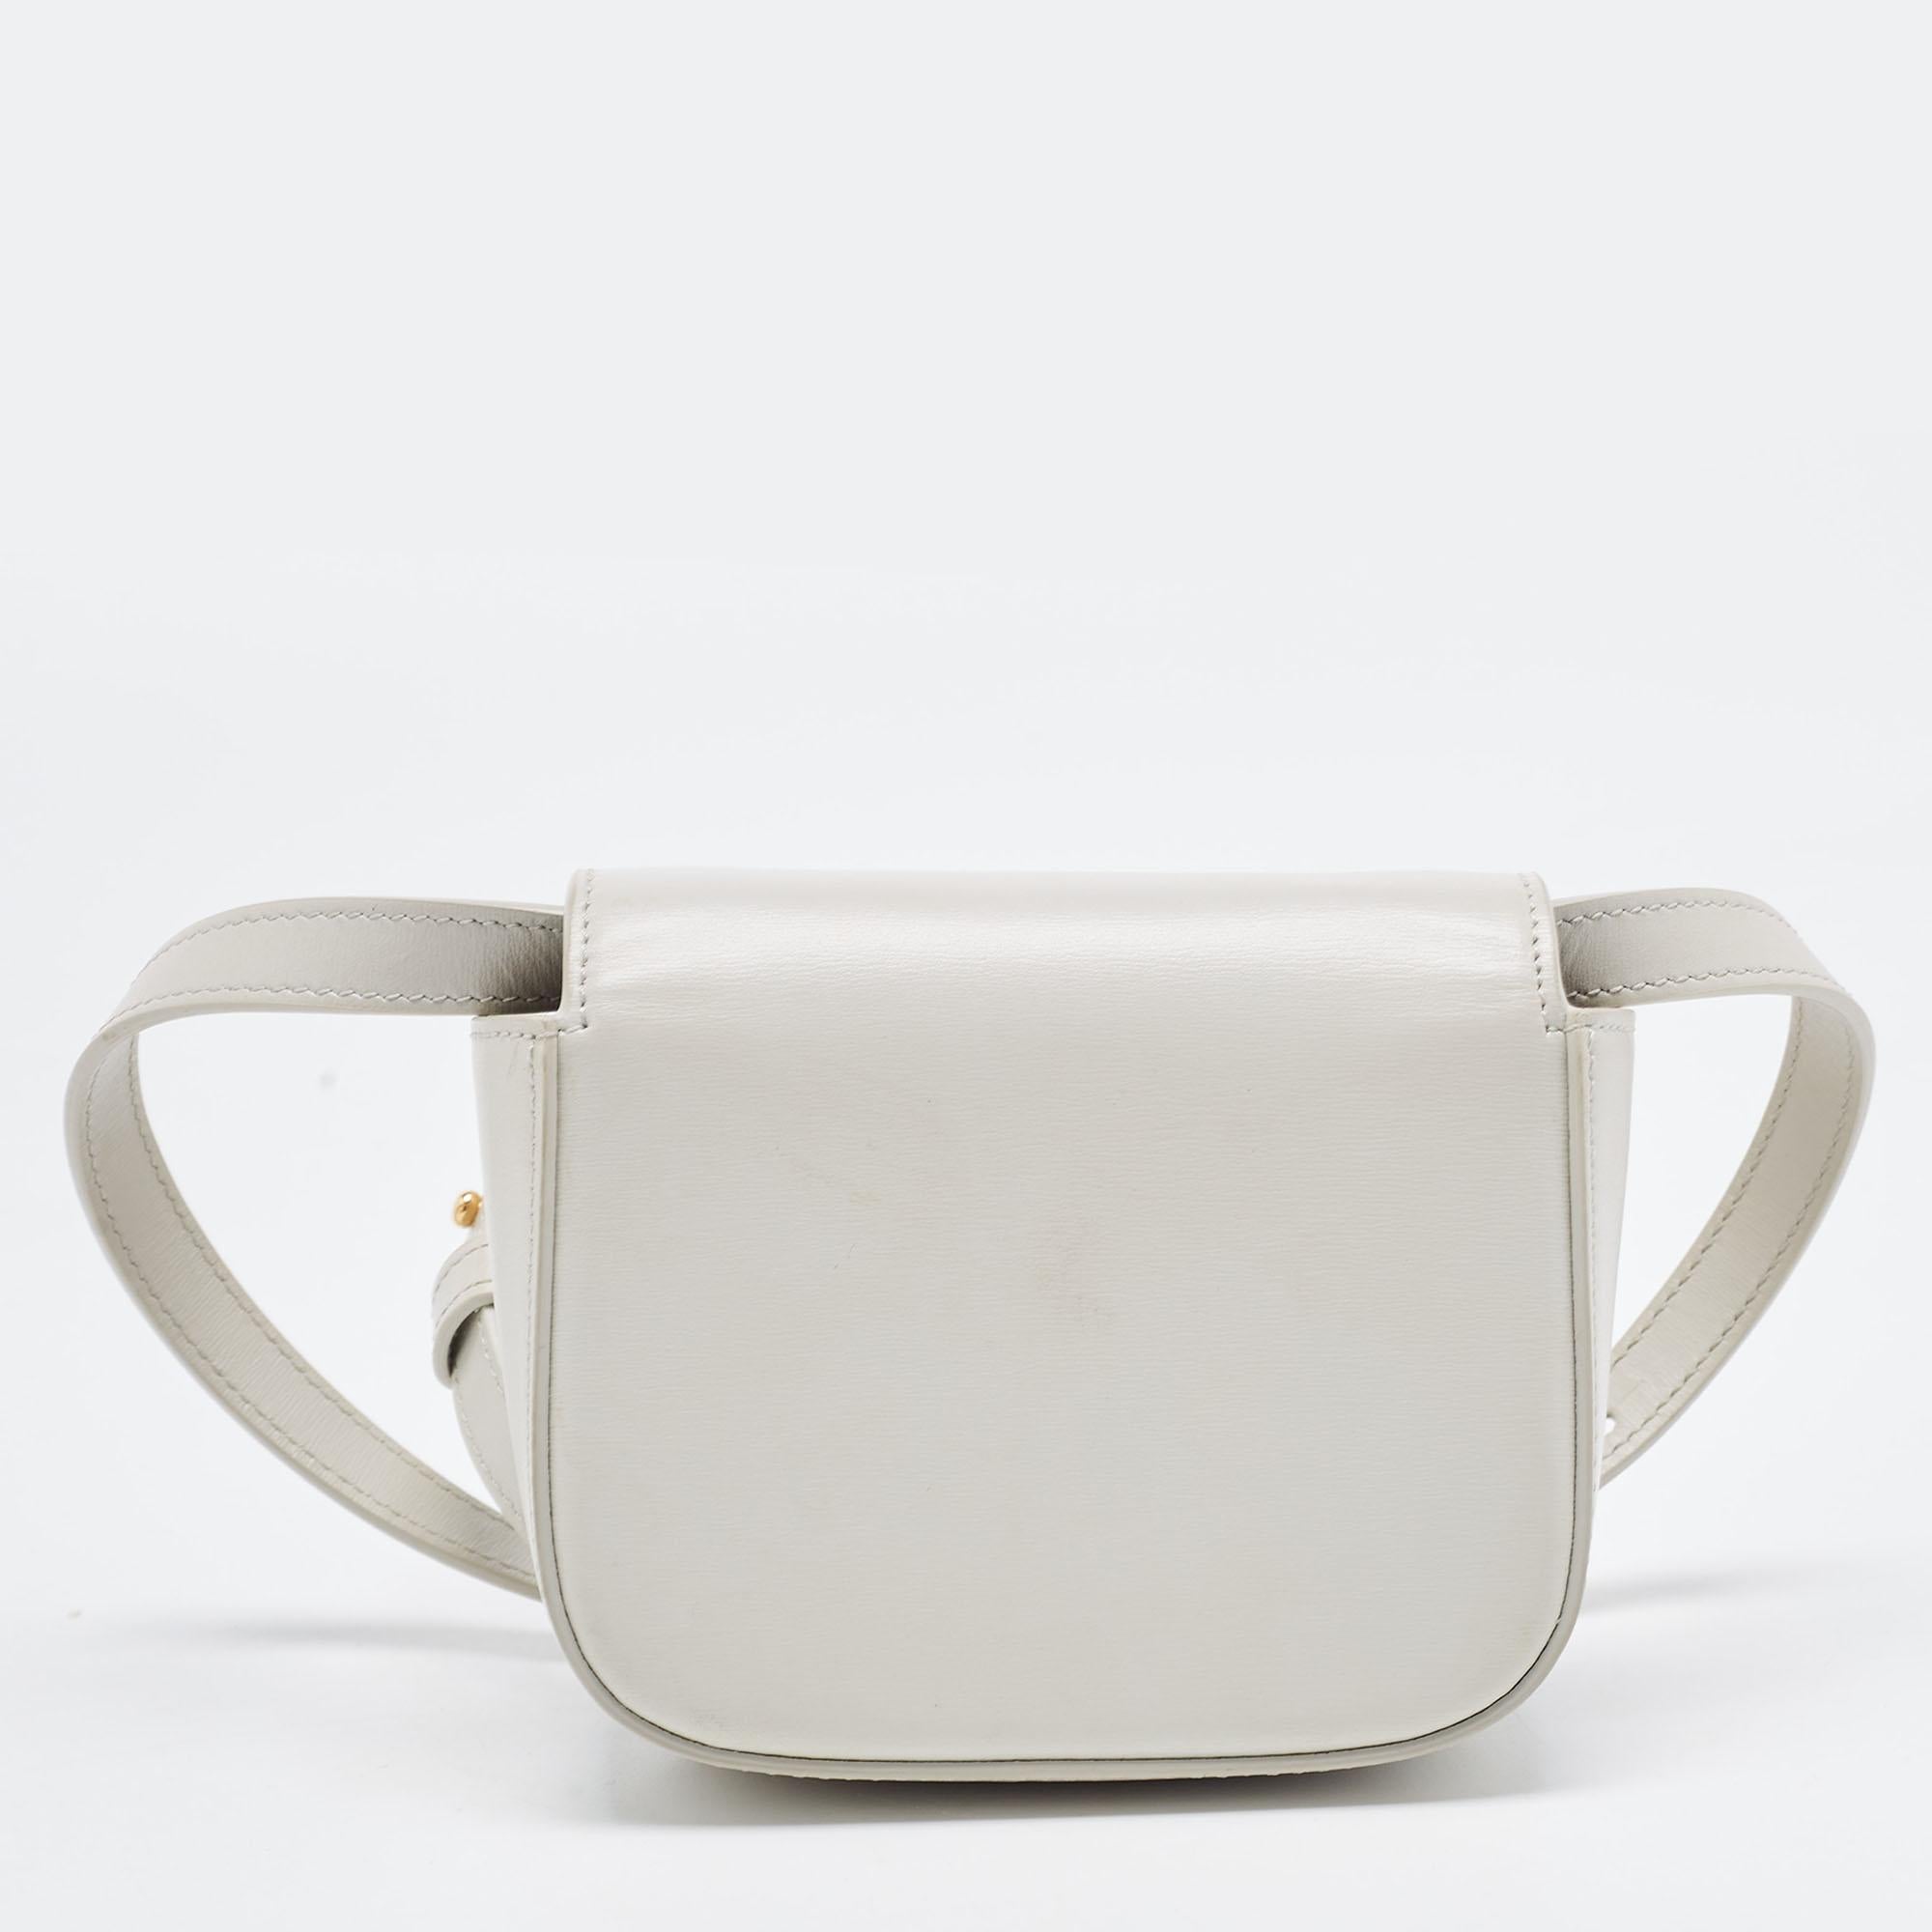 Marked by flawless craftsmanship and enduring appeal, this Celine Claude shoulder bag in off-white is bound to be a versatile and durable accessory. It has a well-sized interior and a shoulder strap.

Includes: Detachable strap